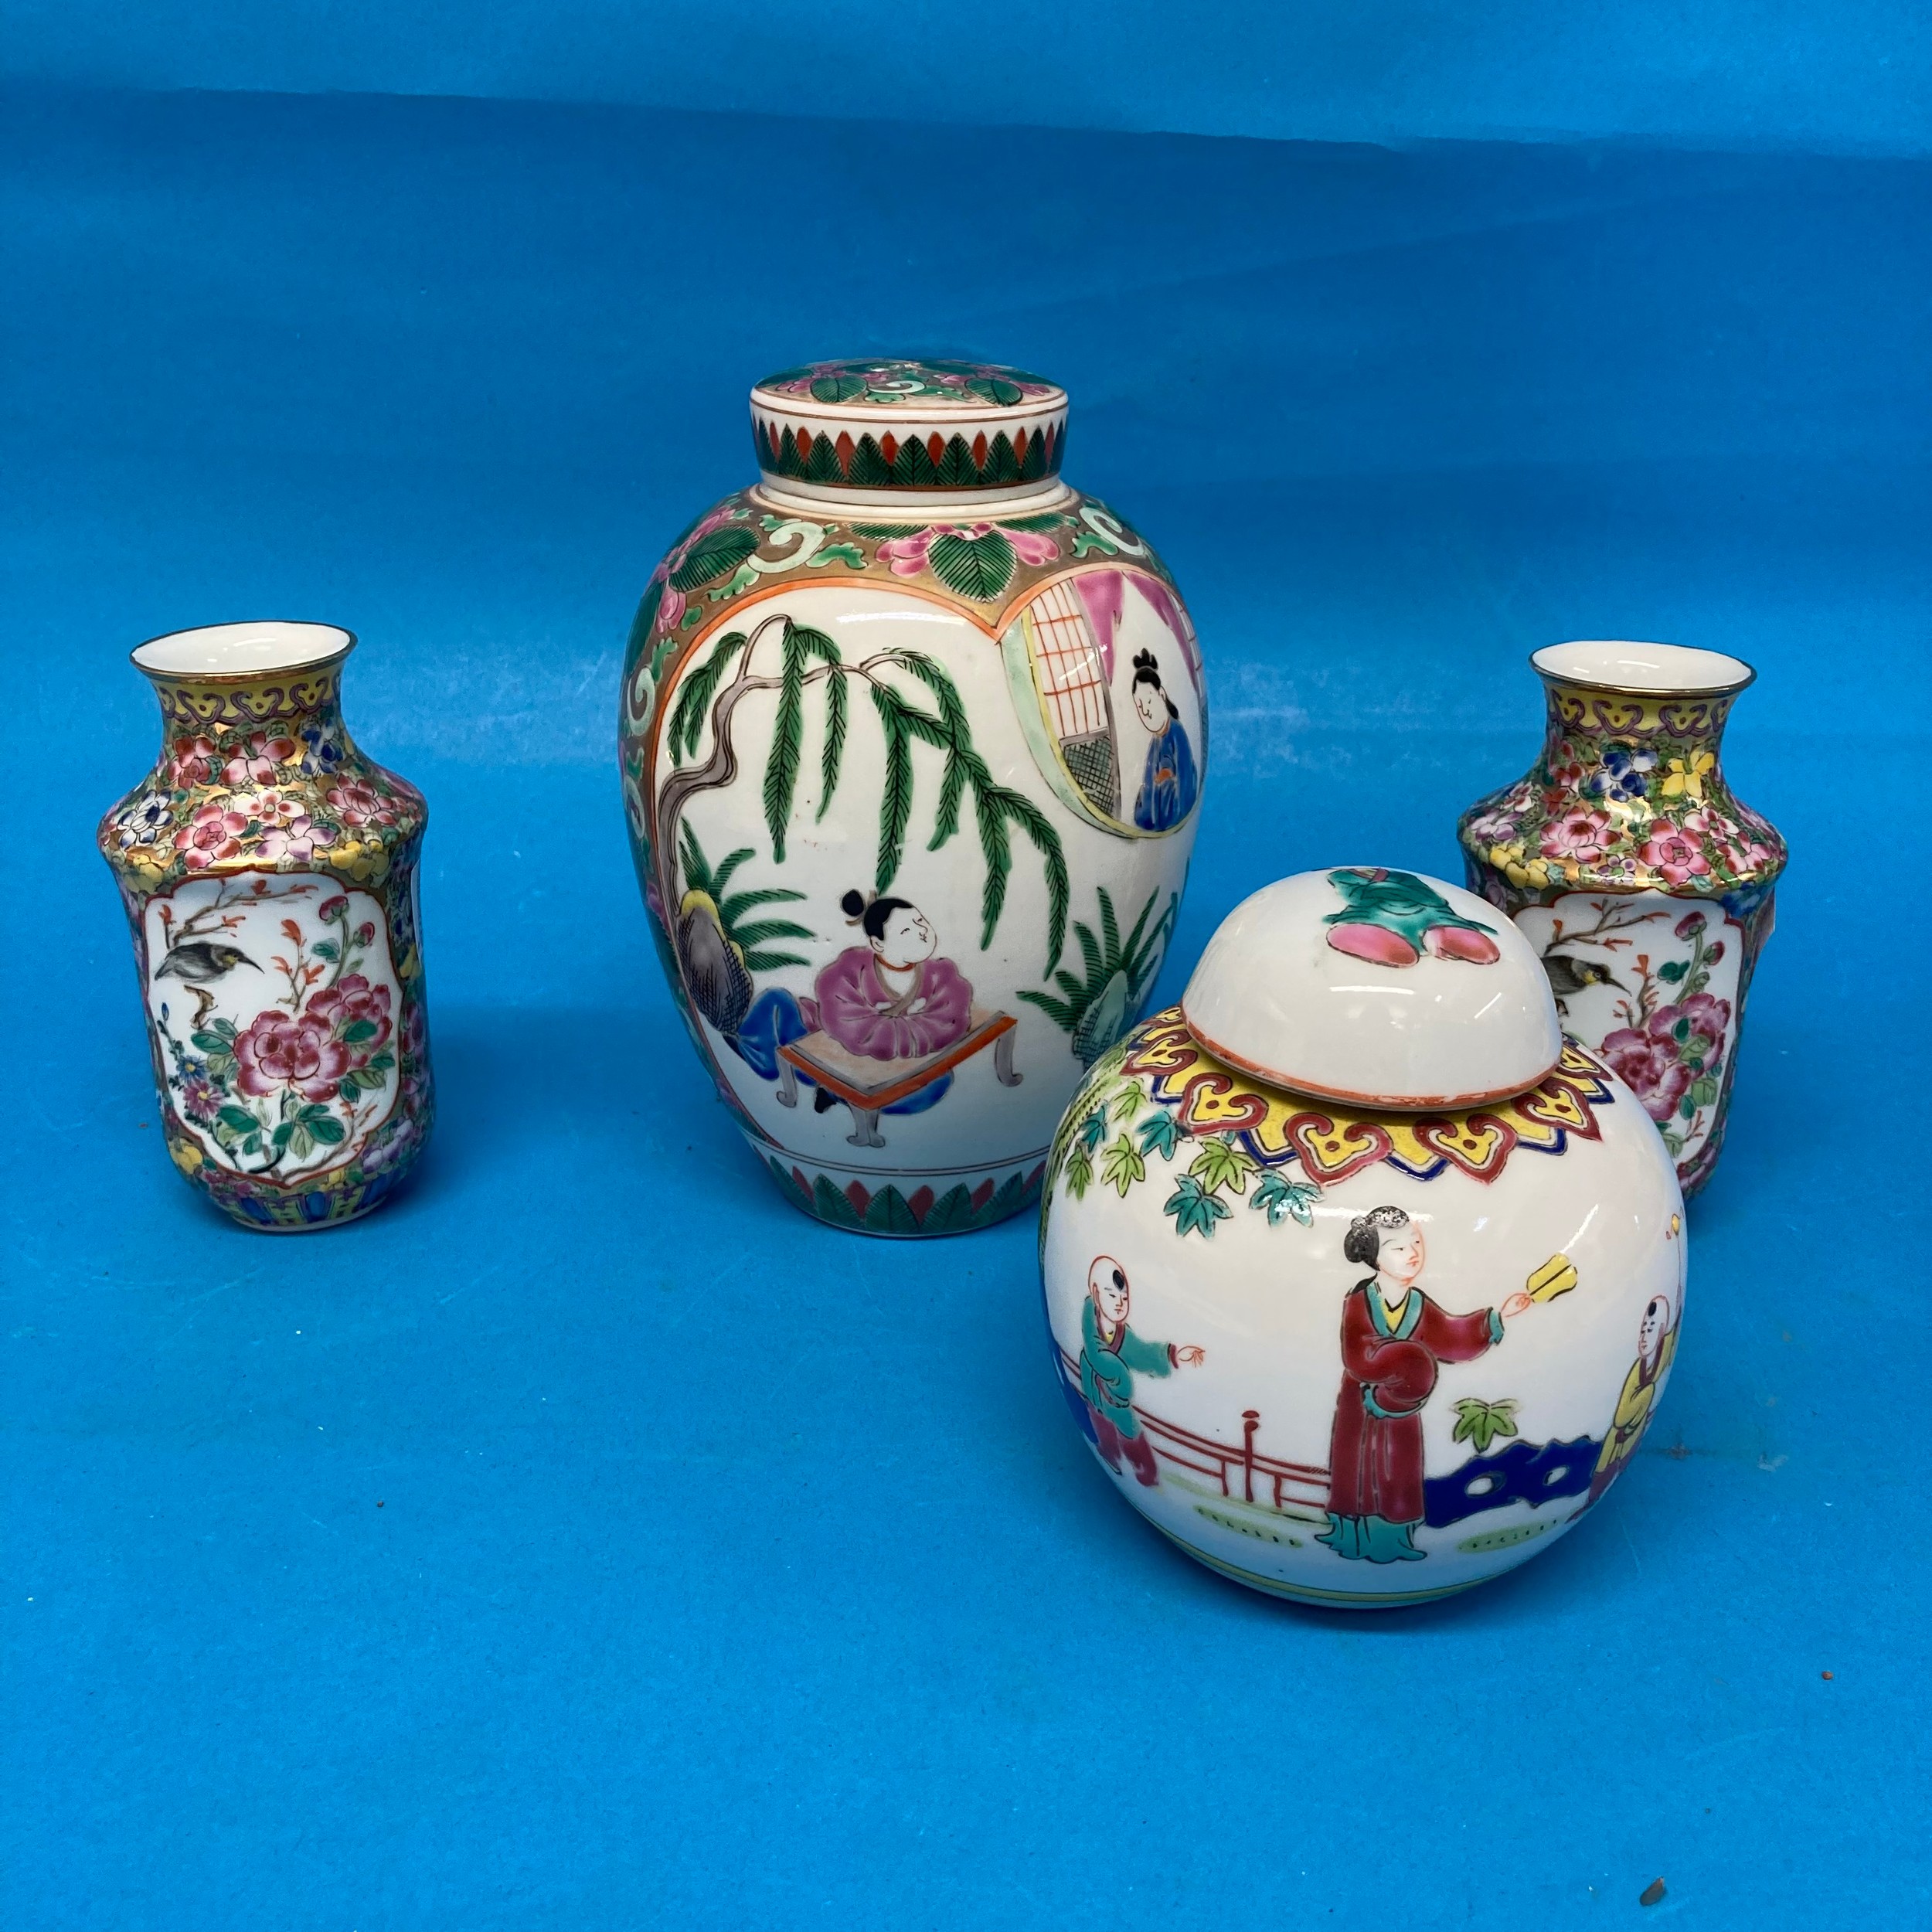 A Chinese famille rose Tobacco Jar, with interior and exterior lids, decorated in typical style with